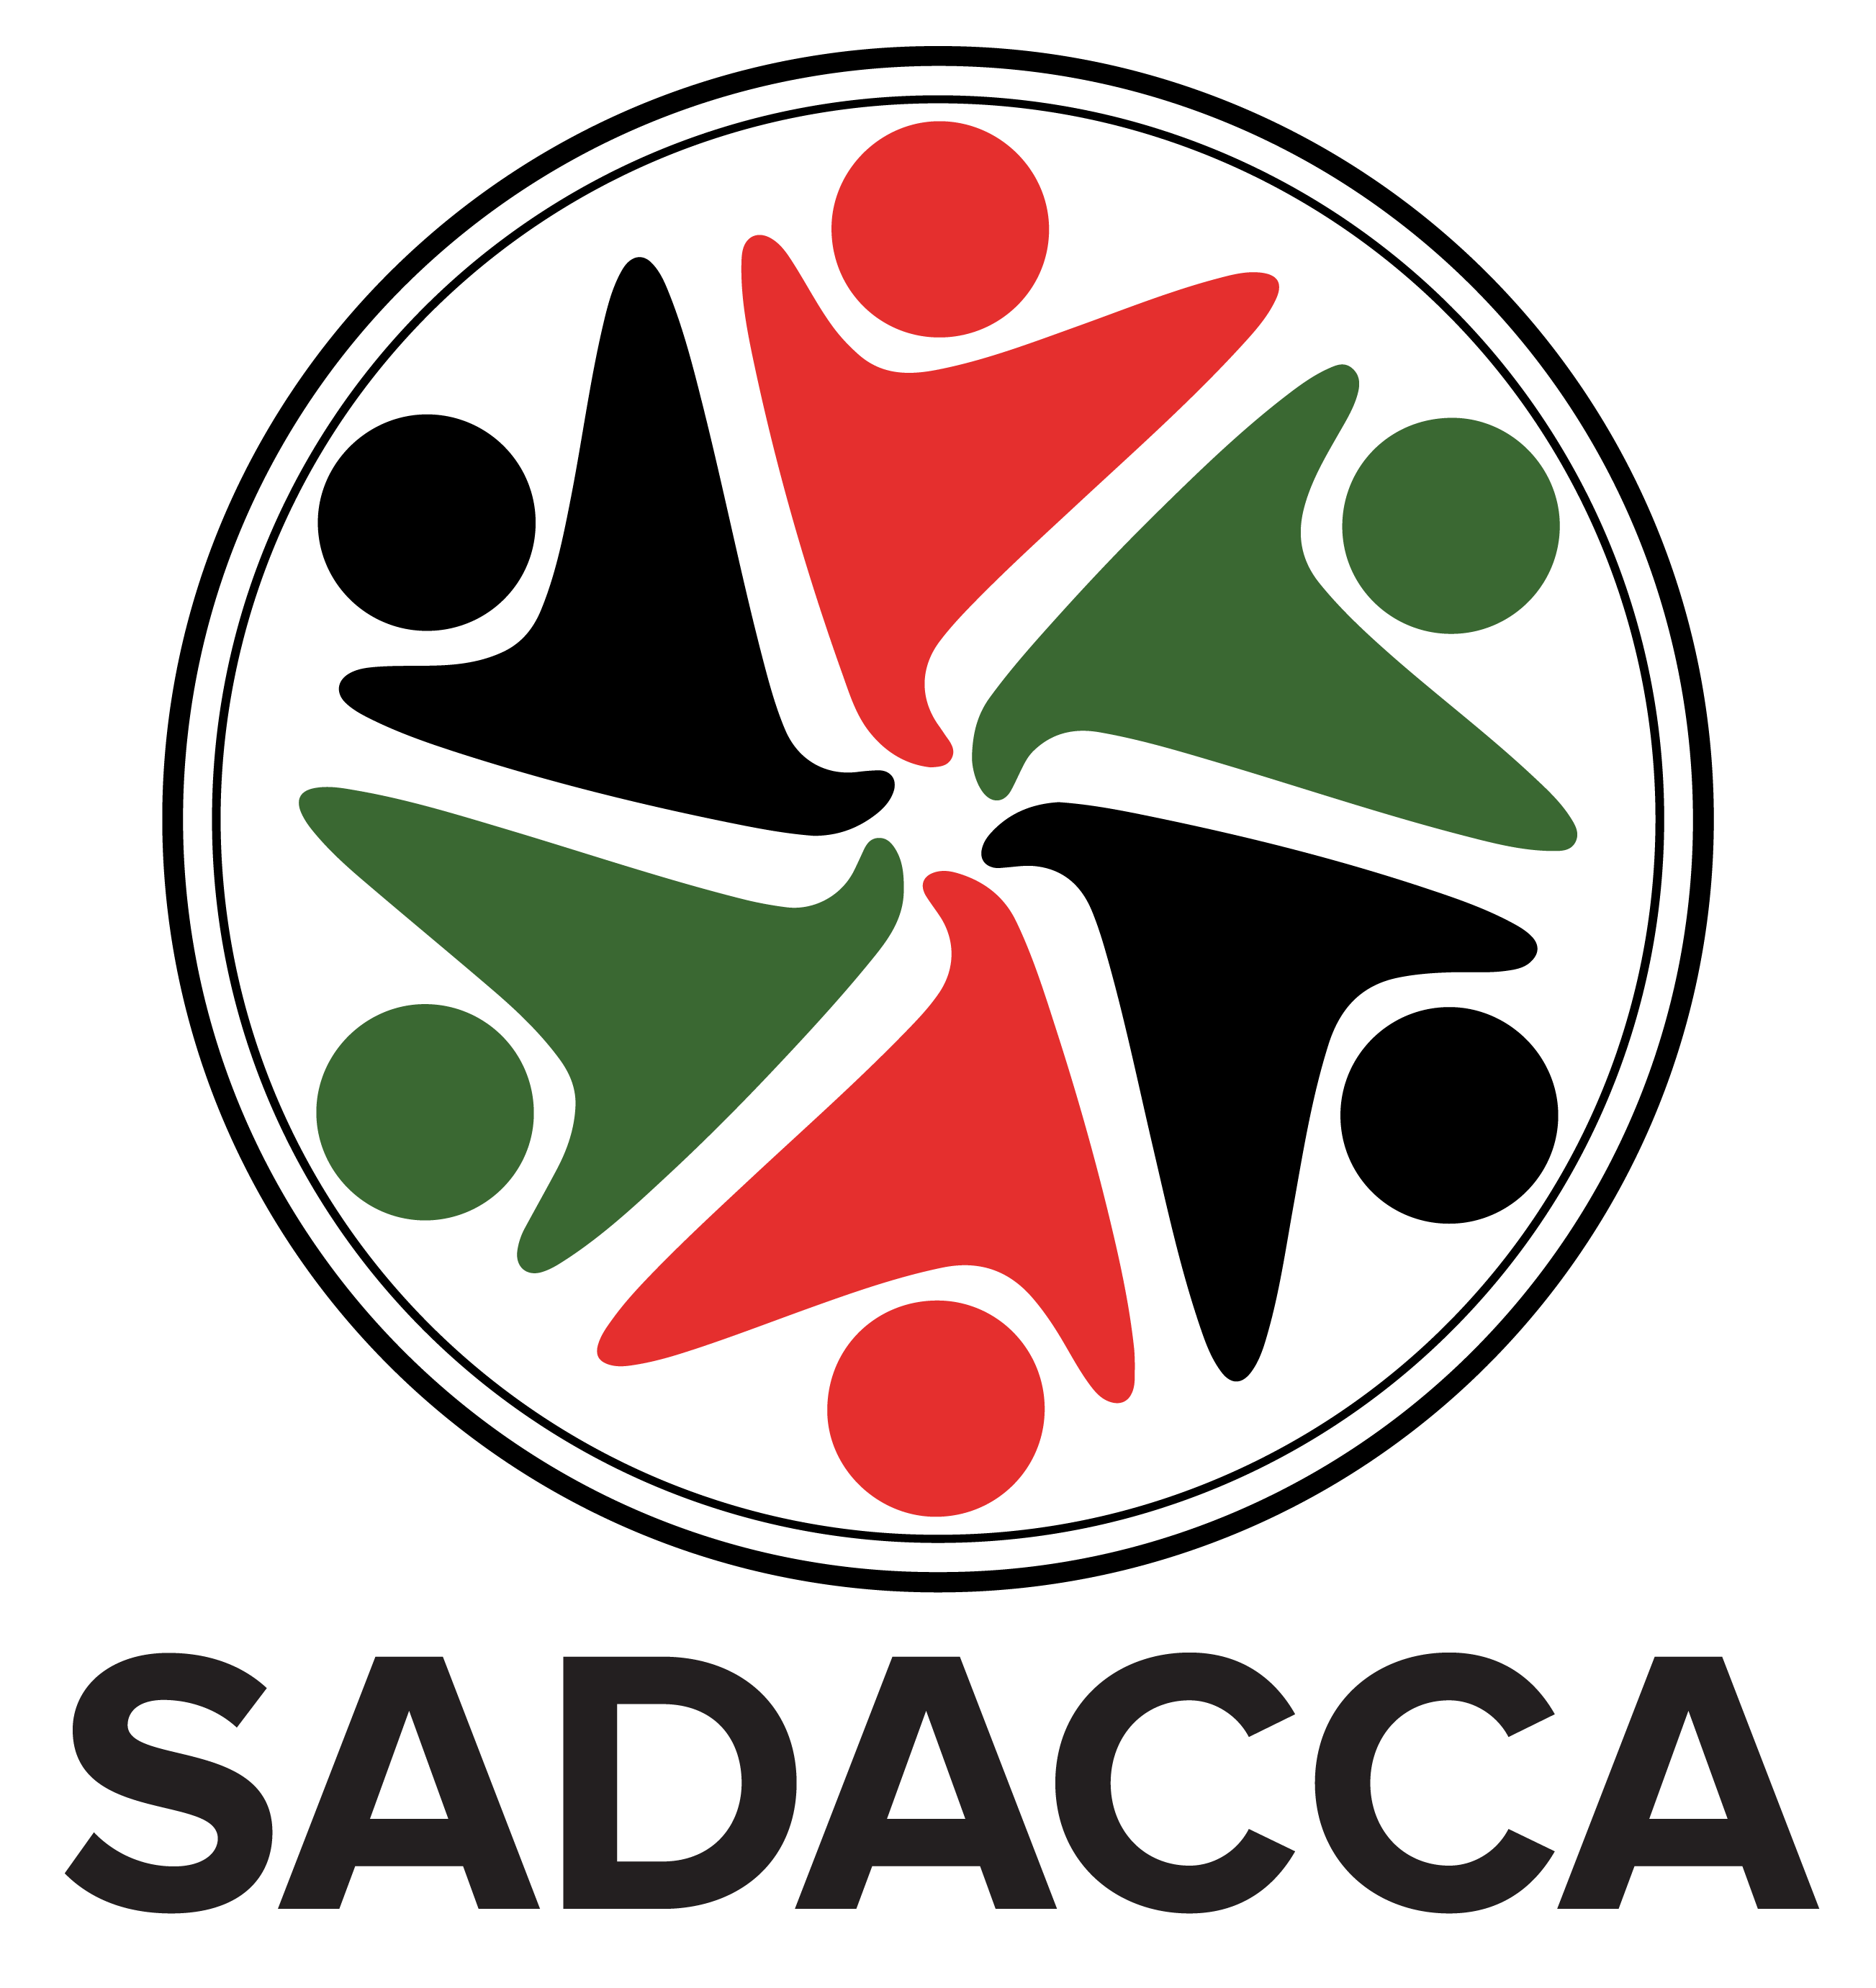 SADACCA Adult Day Care Centre | Sheffield Mental Health Guide